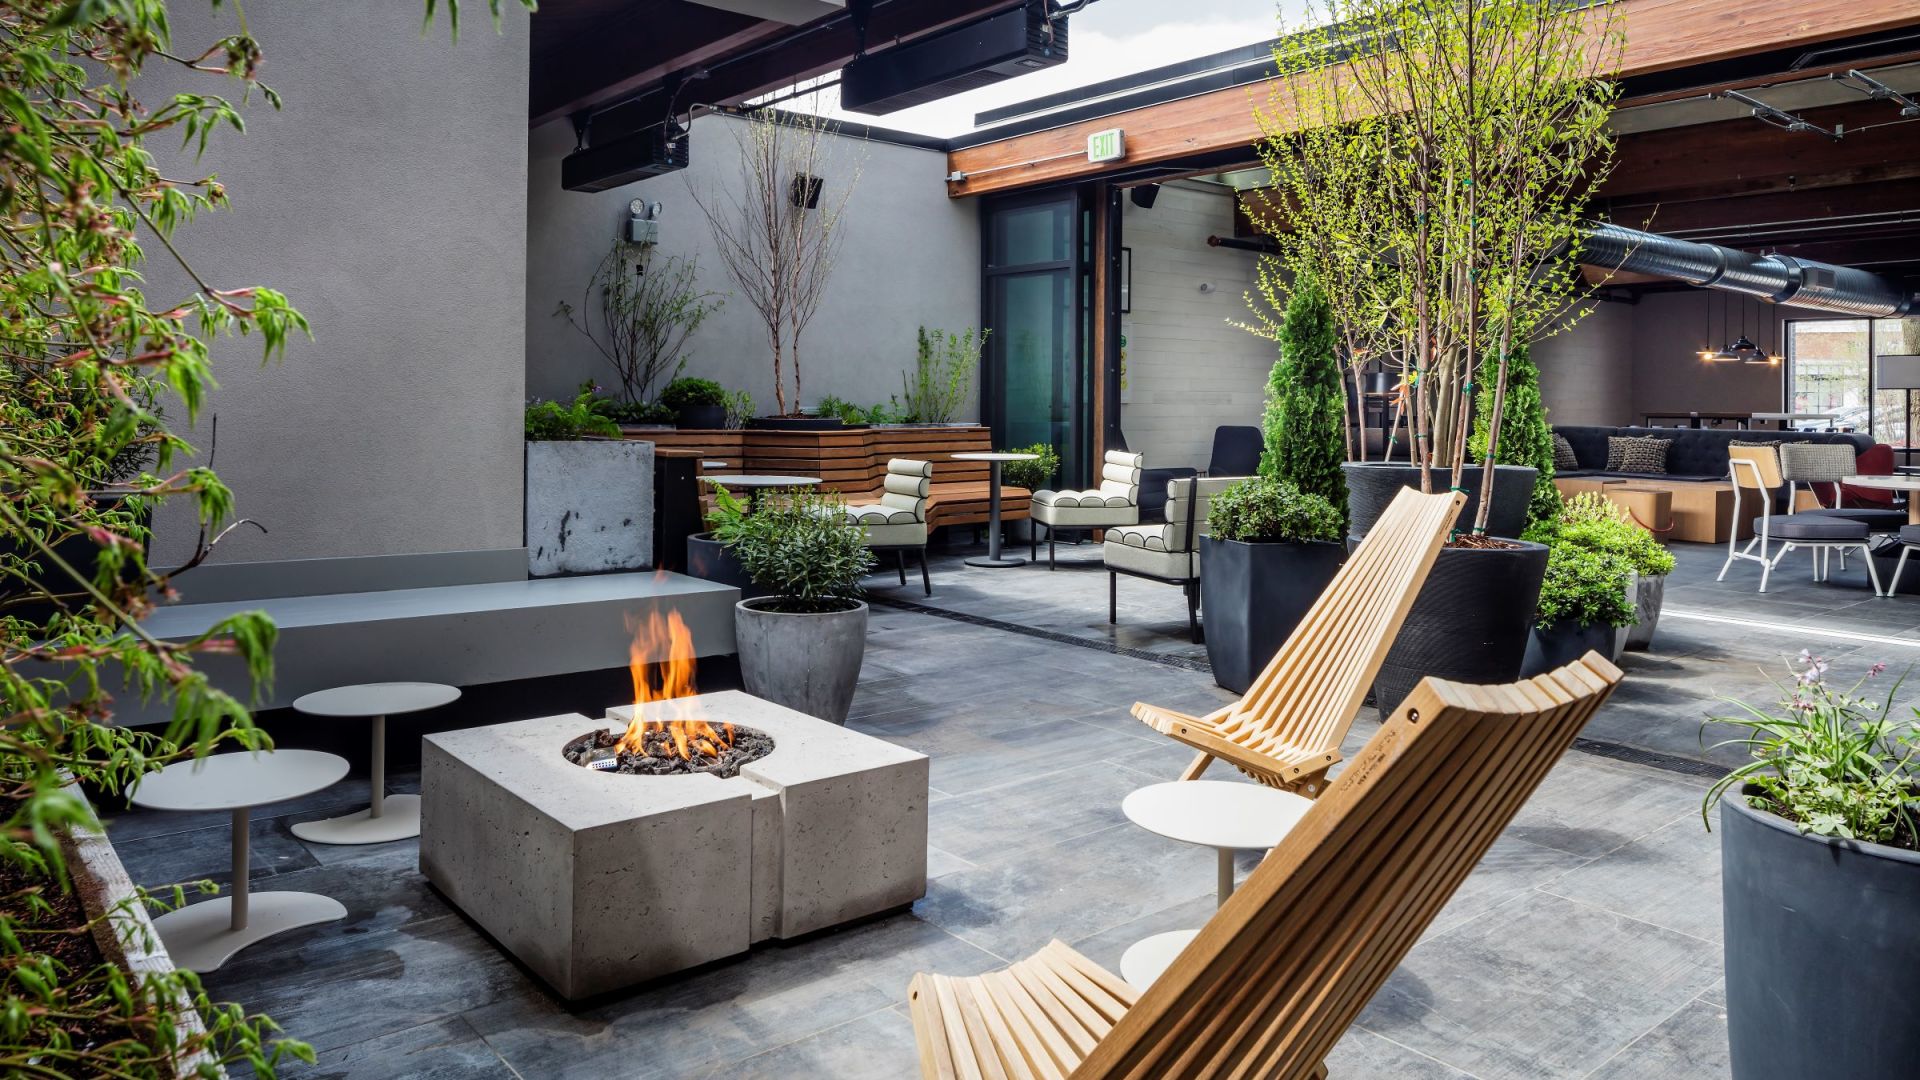 A Fire Pit With Chairs And Tables